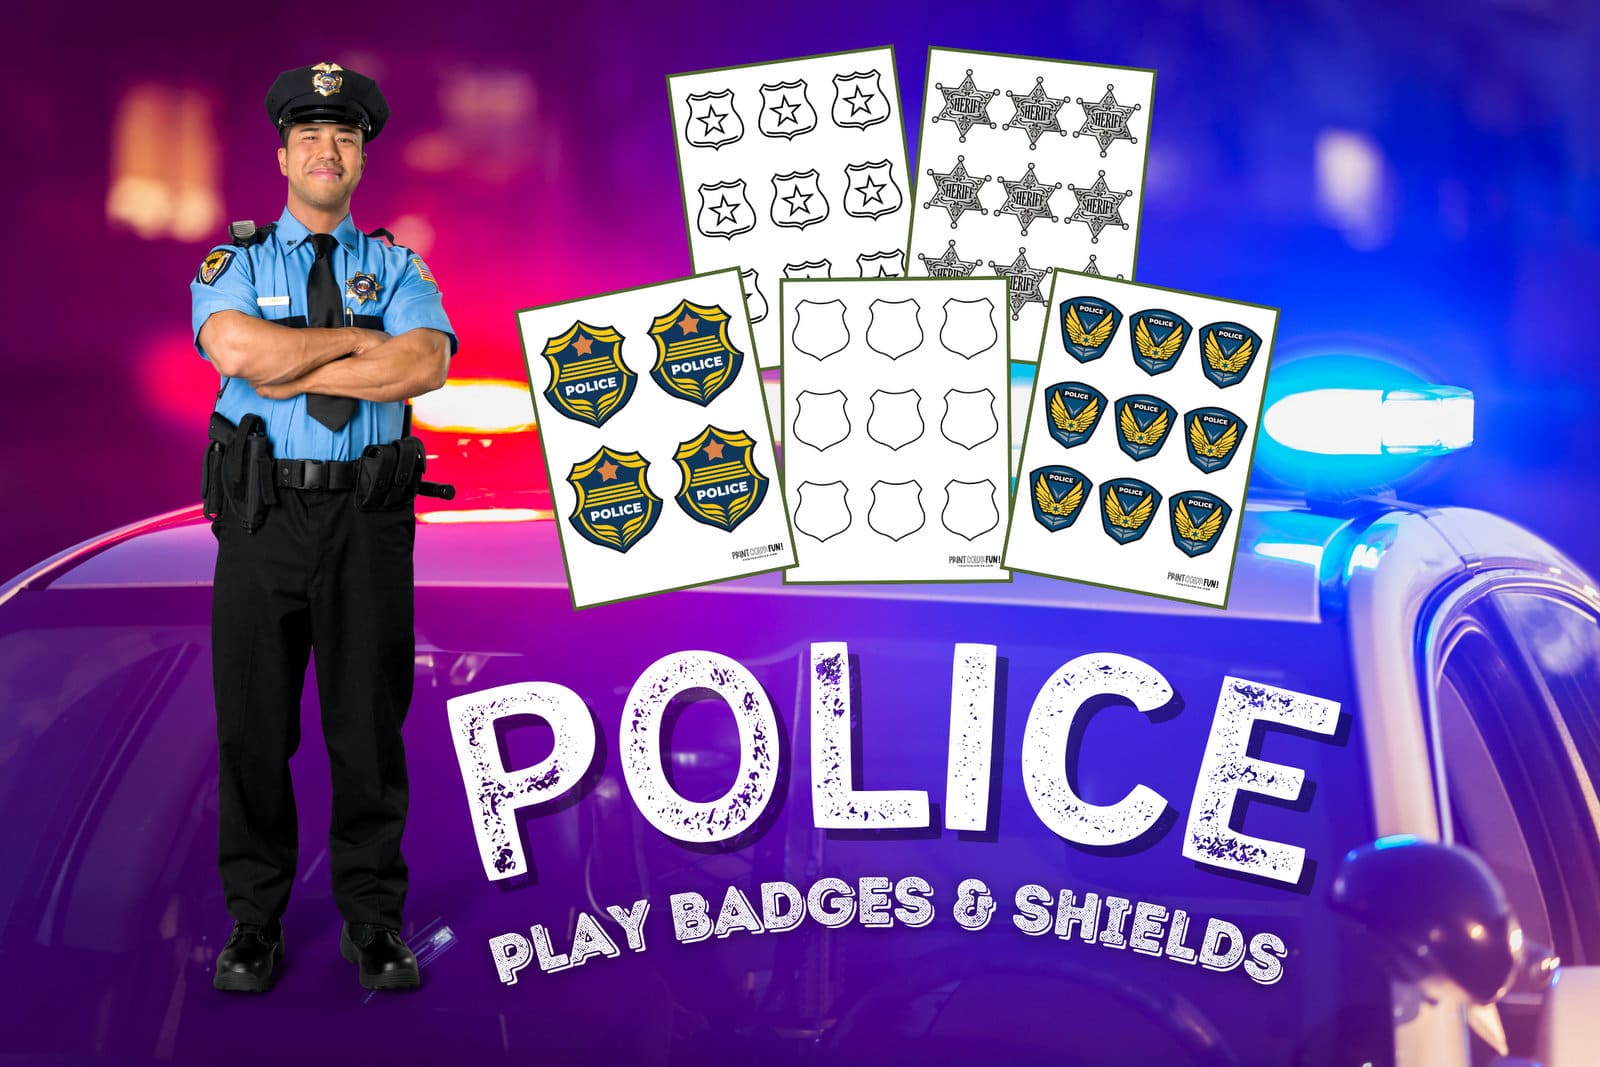 These cool sheriff police badge clipart and coloring pages make playtime learning fun at